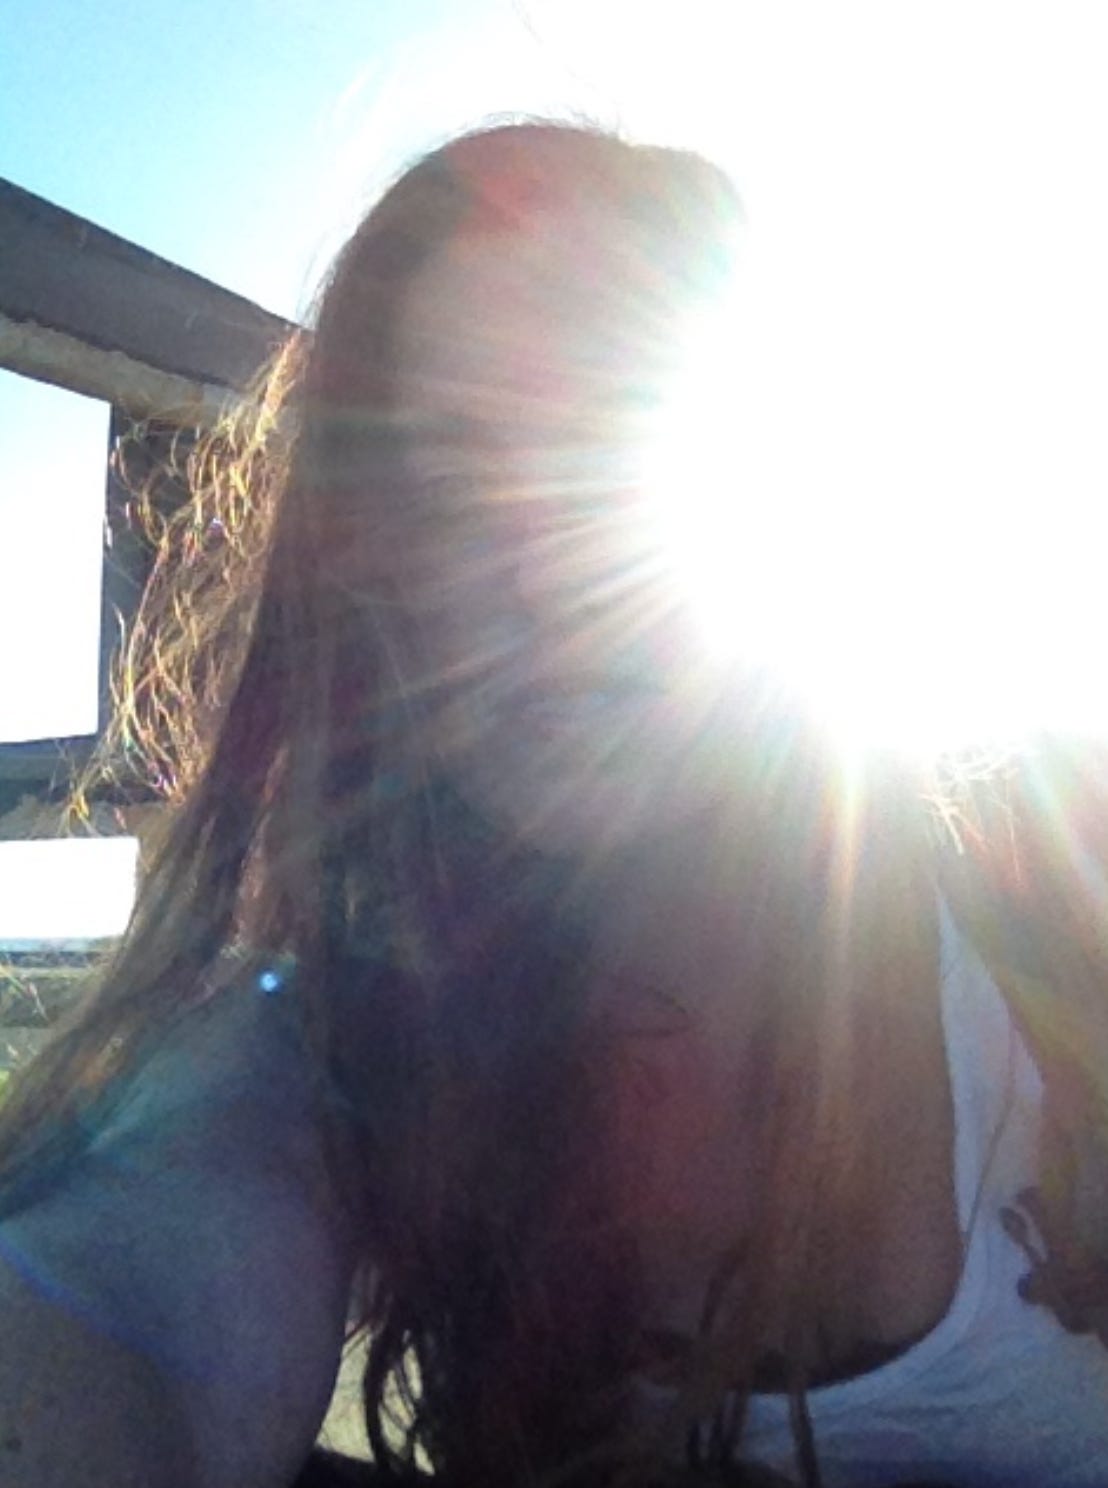 A woman's face obscured by backlit sunlight, a determined "finding myself" expression